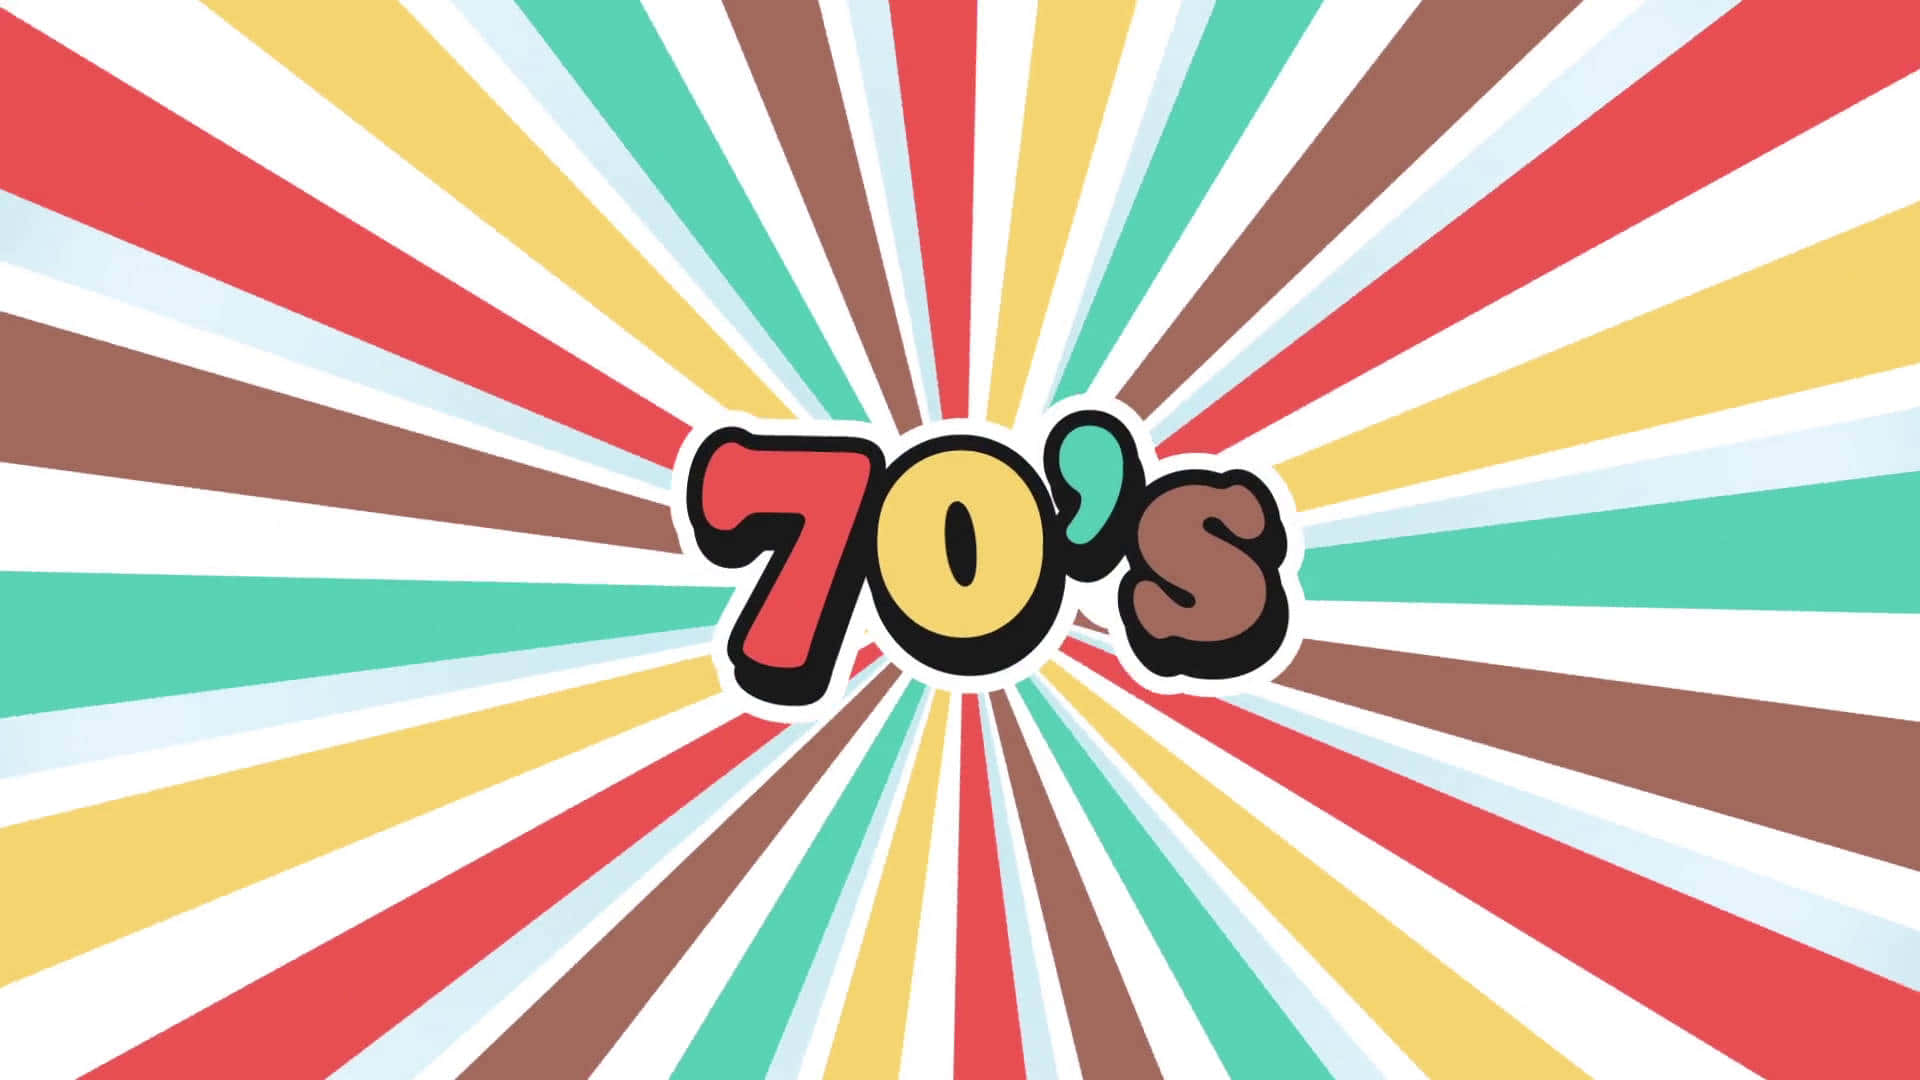 “A Retro-Inspired Look Back at the 1970s”